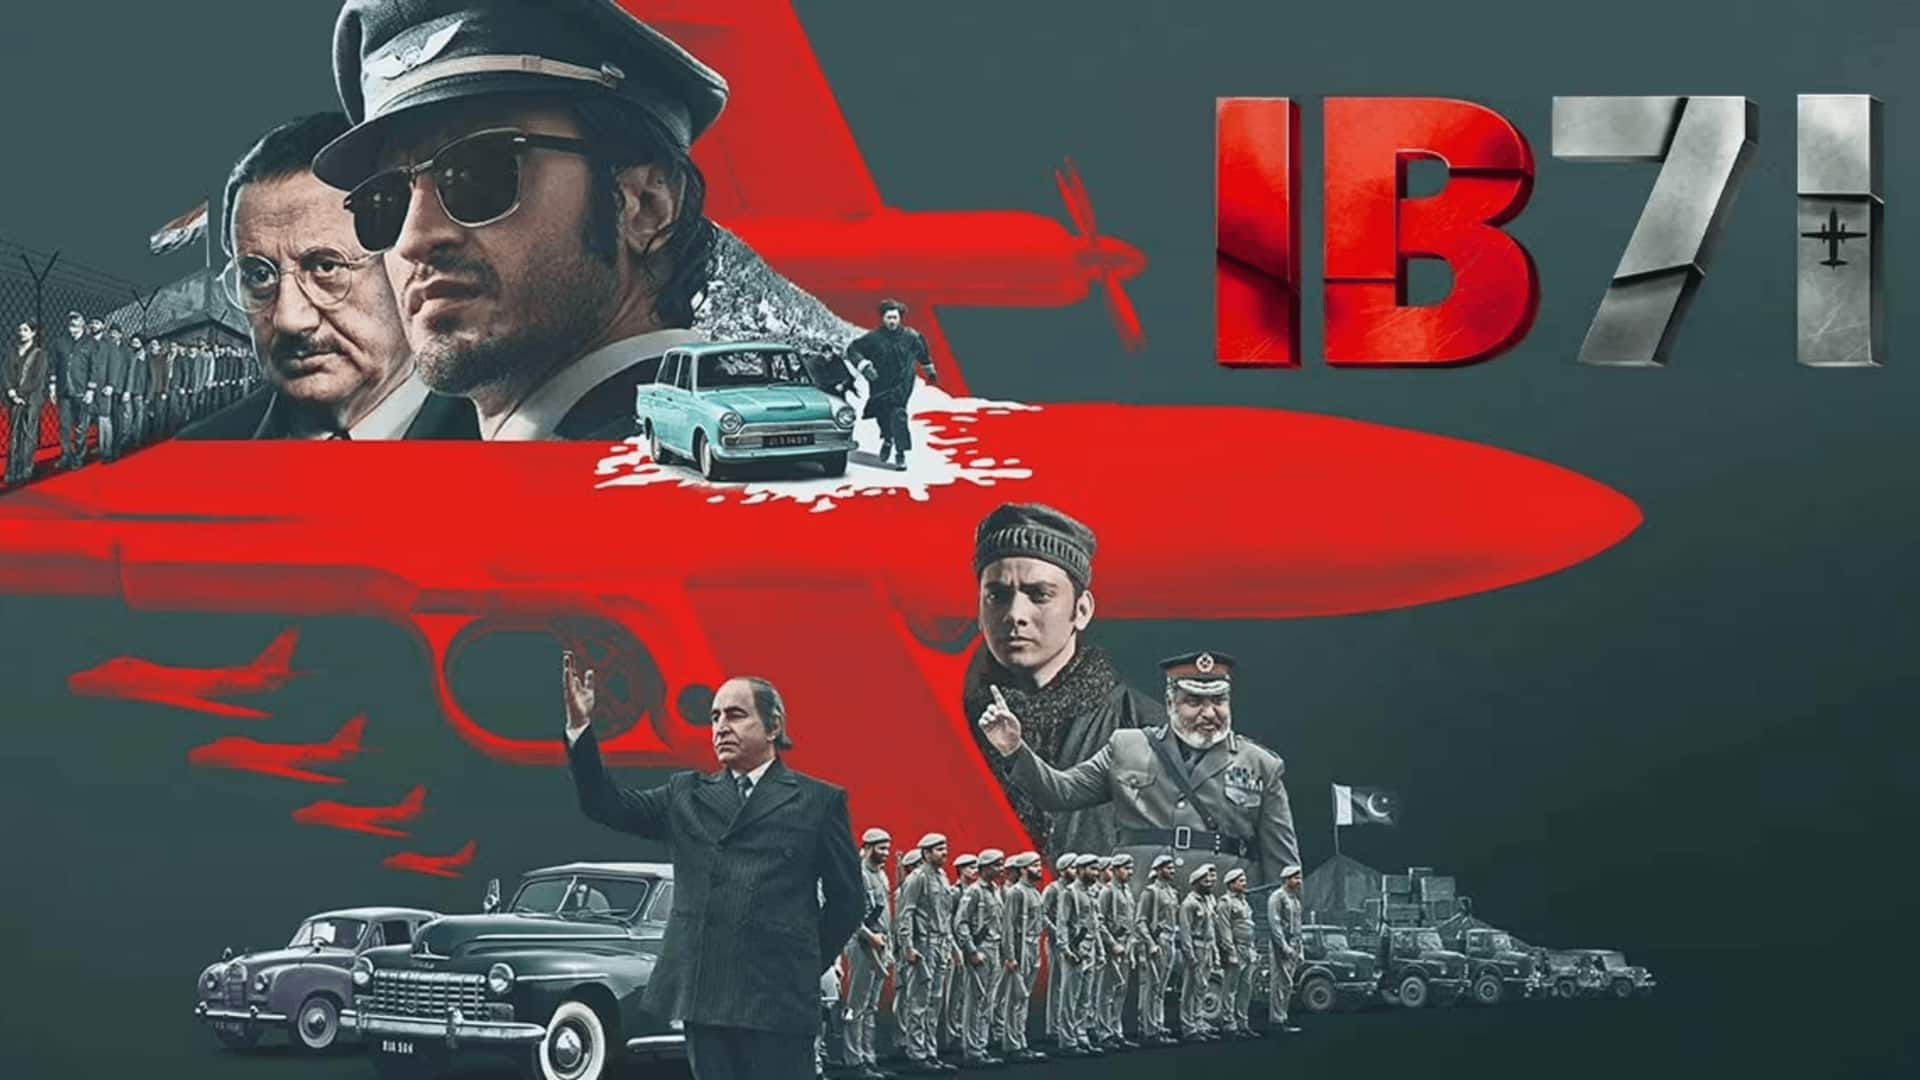 Box office: 'IB71' grows over the weekend